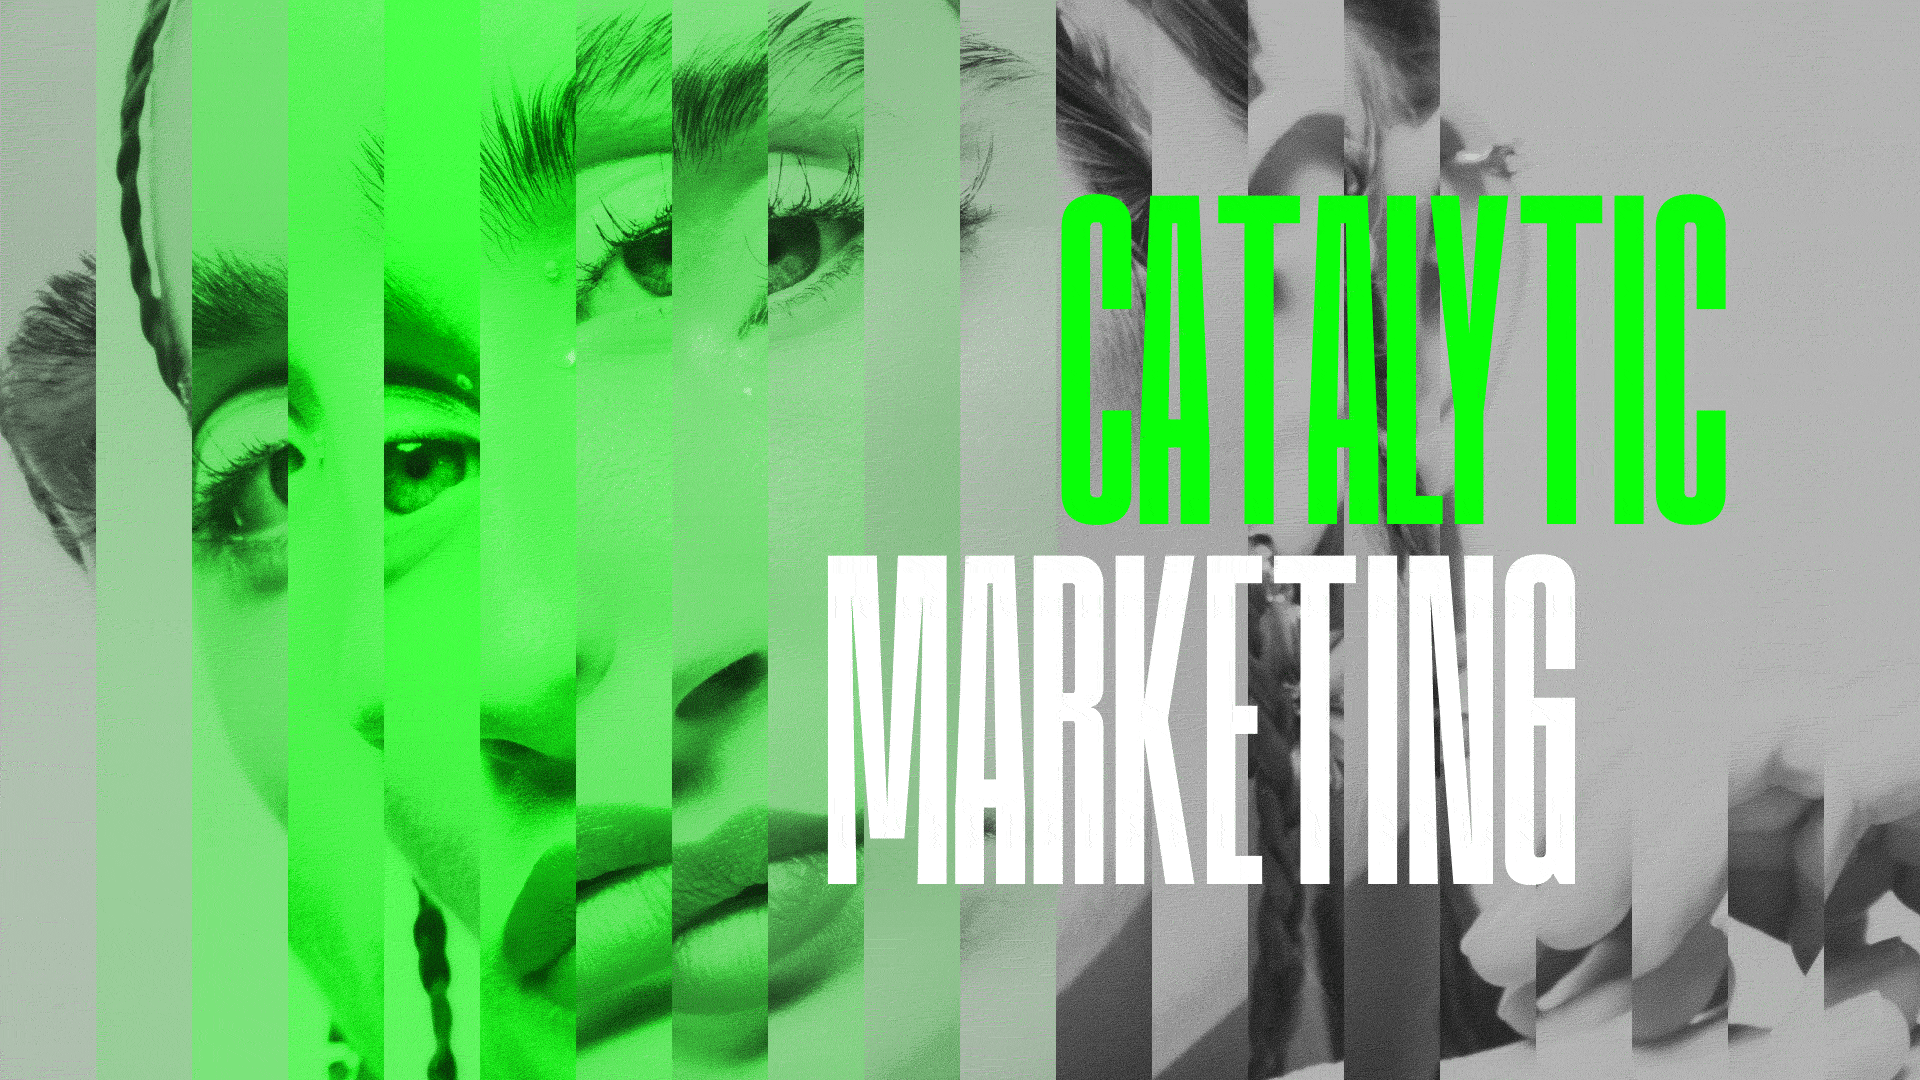 A GIG featuring a woman's face and the words 'catalytic marketing' as part of an article featuring catalytic marketing examples.